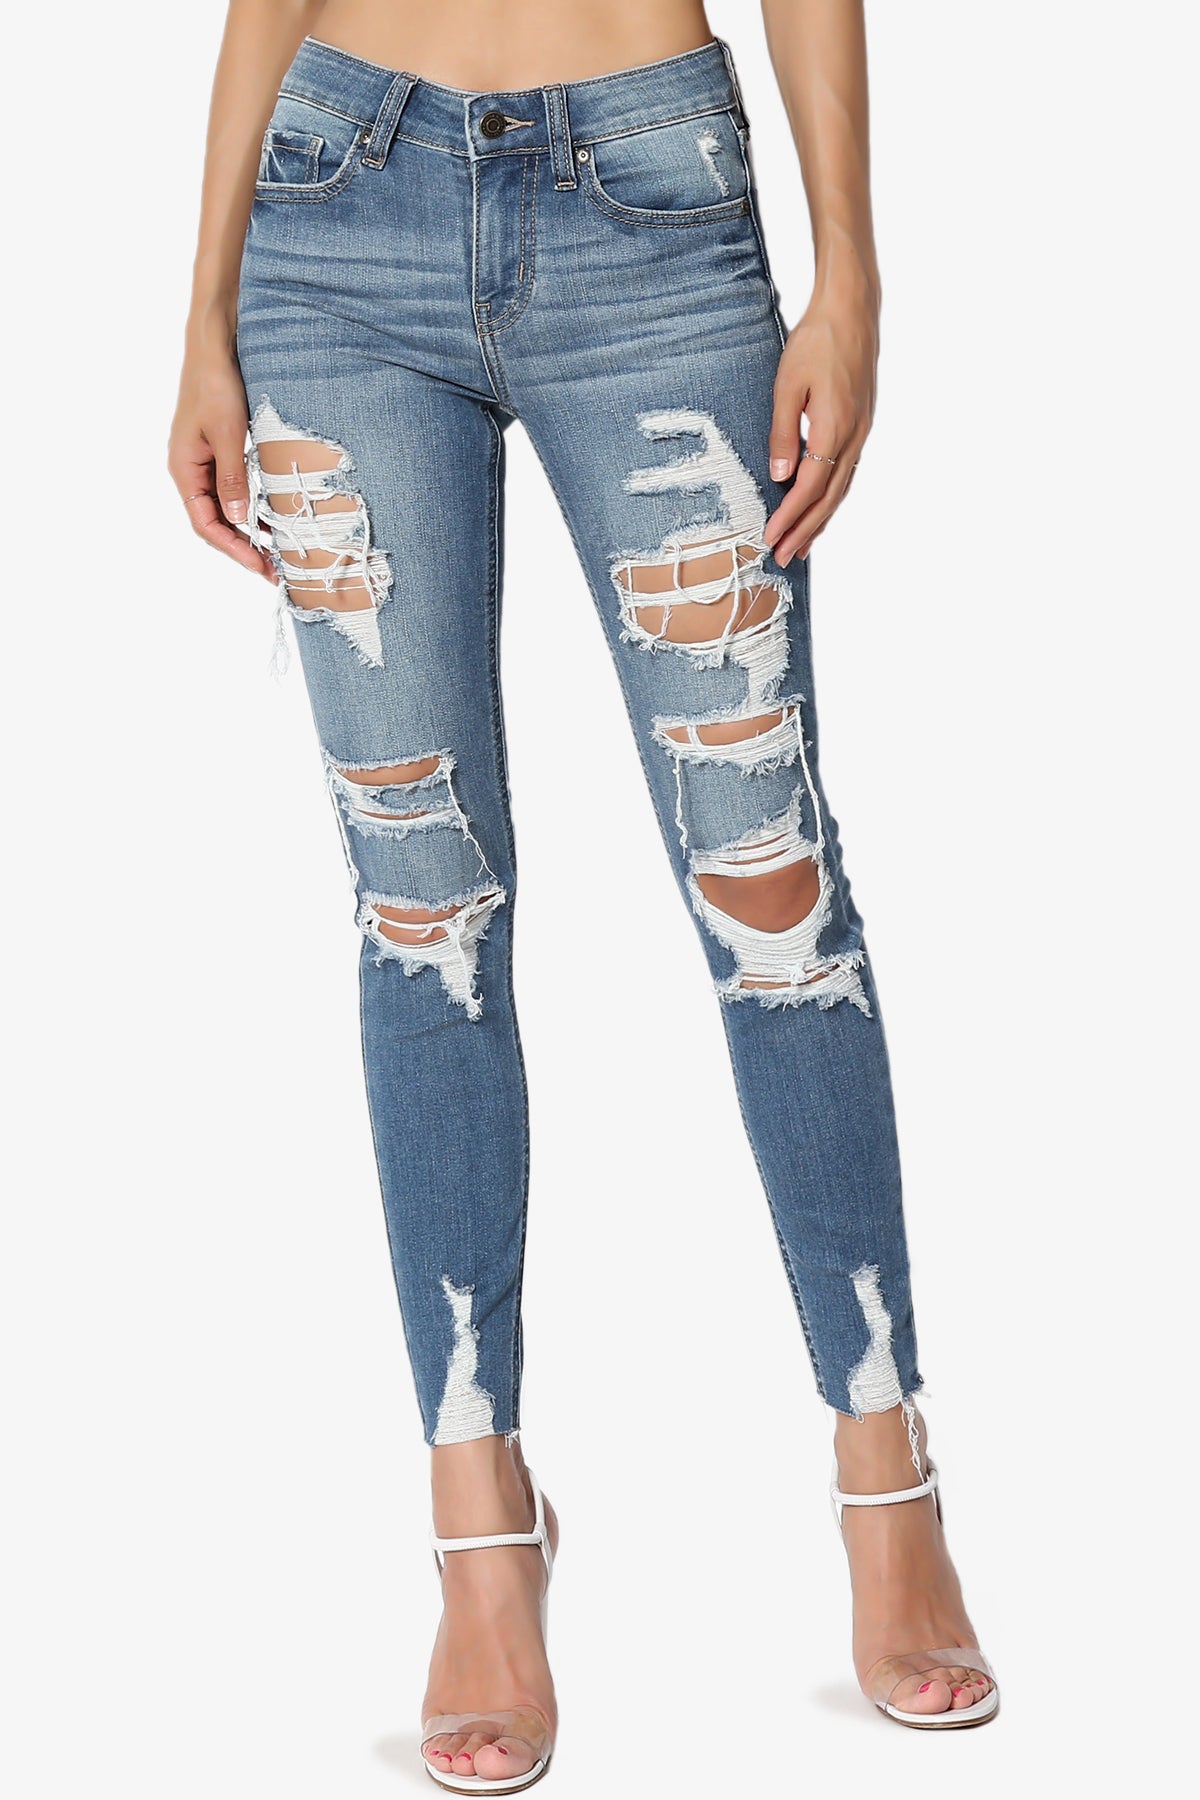 Load image into Gallery viewer, JOSIE Mid Rise Ankle Skinny Jeans in Too Deep MD MEDIUM_1
